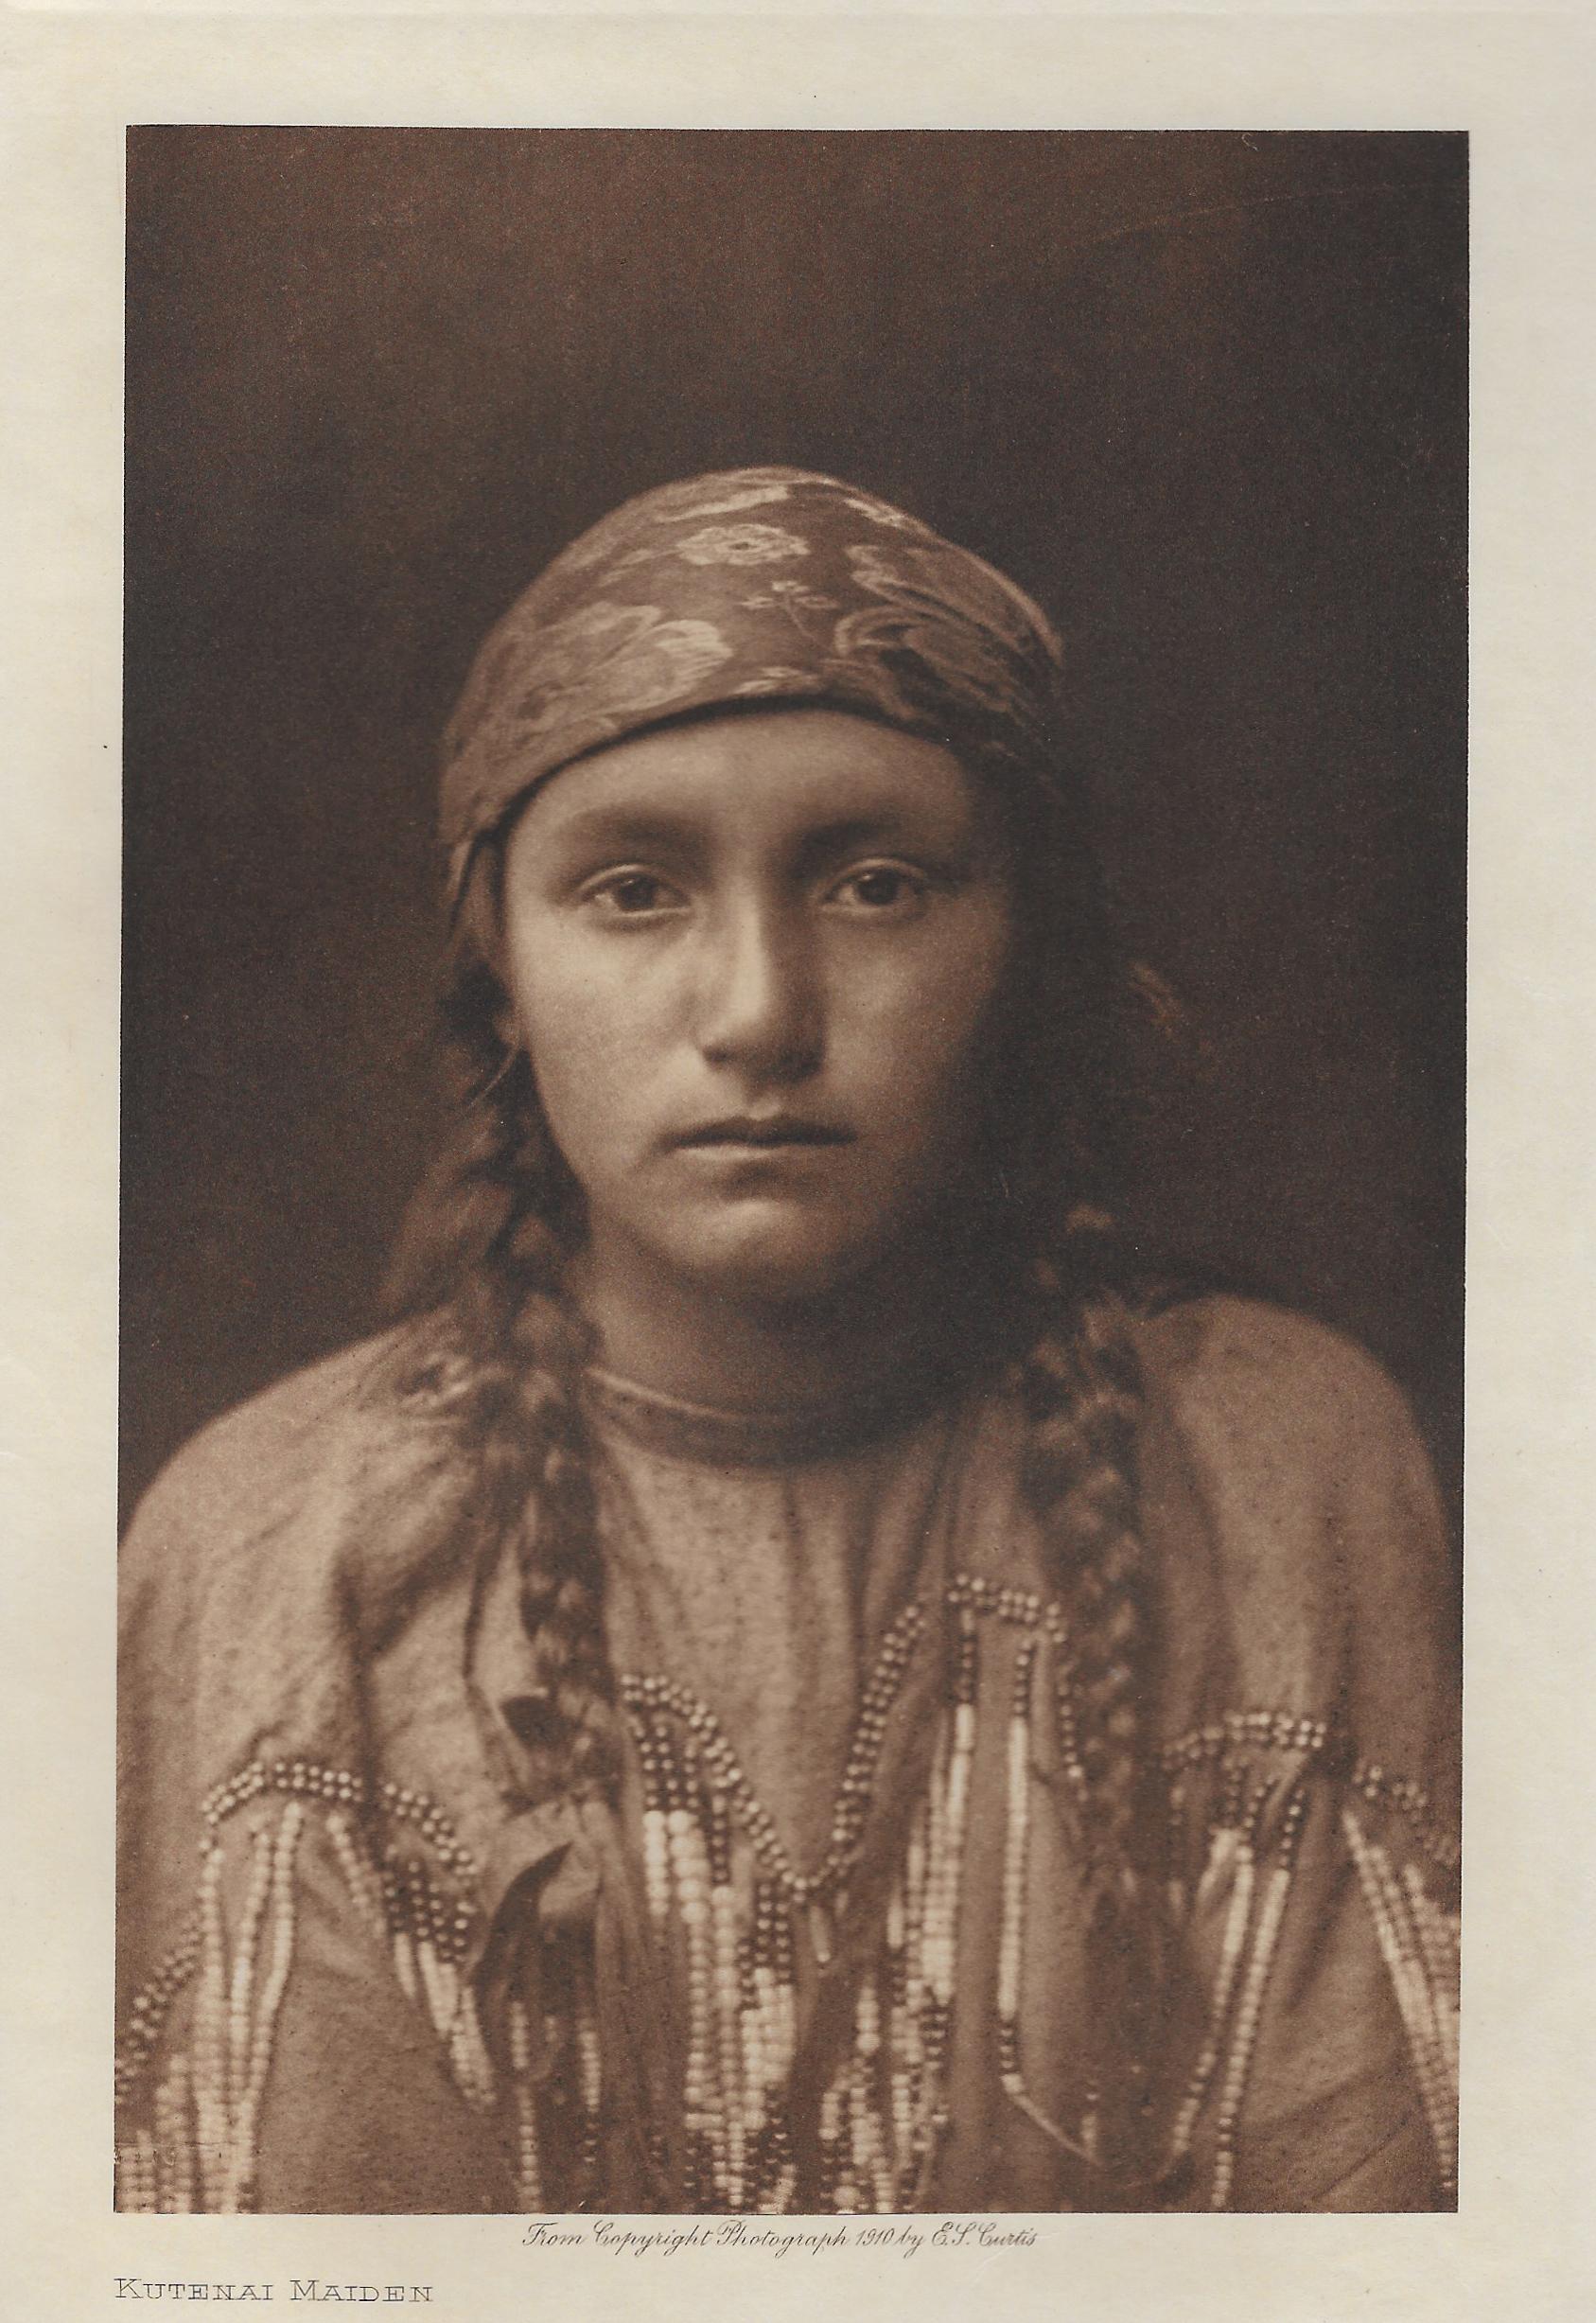 Edward Curtis, Edward Curtis, Kutenai Maiden, 1908, Photogravure. Image Size: 7.25 x 4.25

Born in 1868 near Whitewater, Wisconsin, Edward Sheriff Curtis became one of America’s finest photographers and ethnologists. When the Curtis family moved to